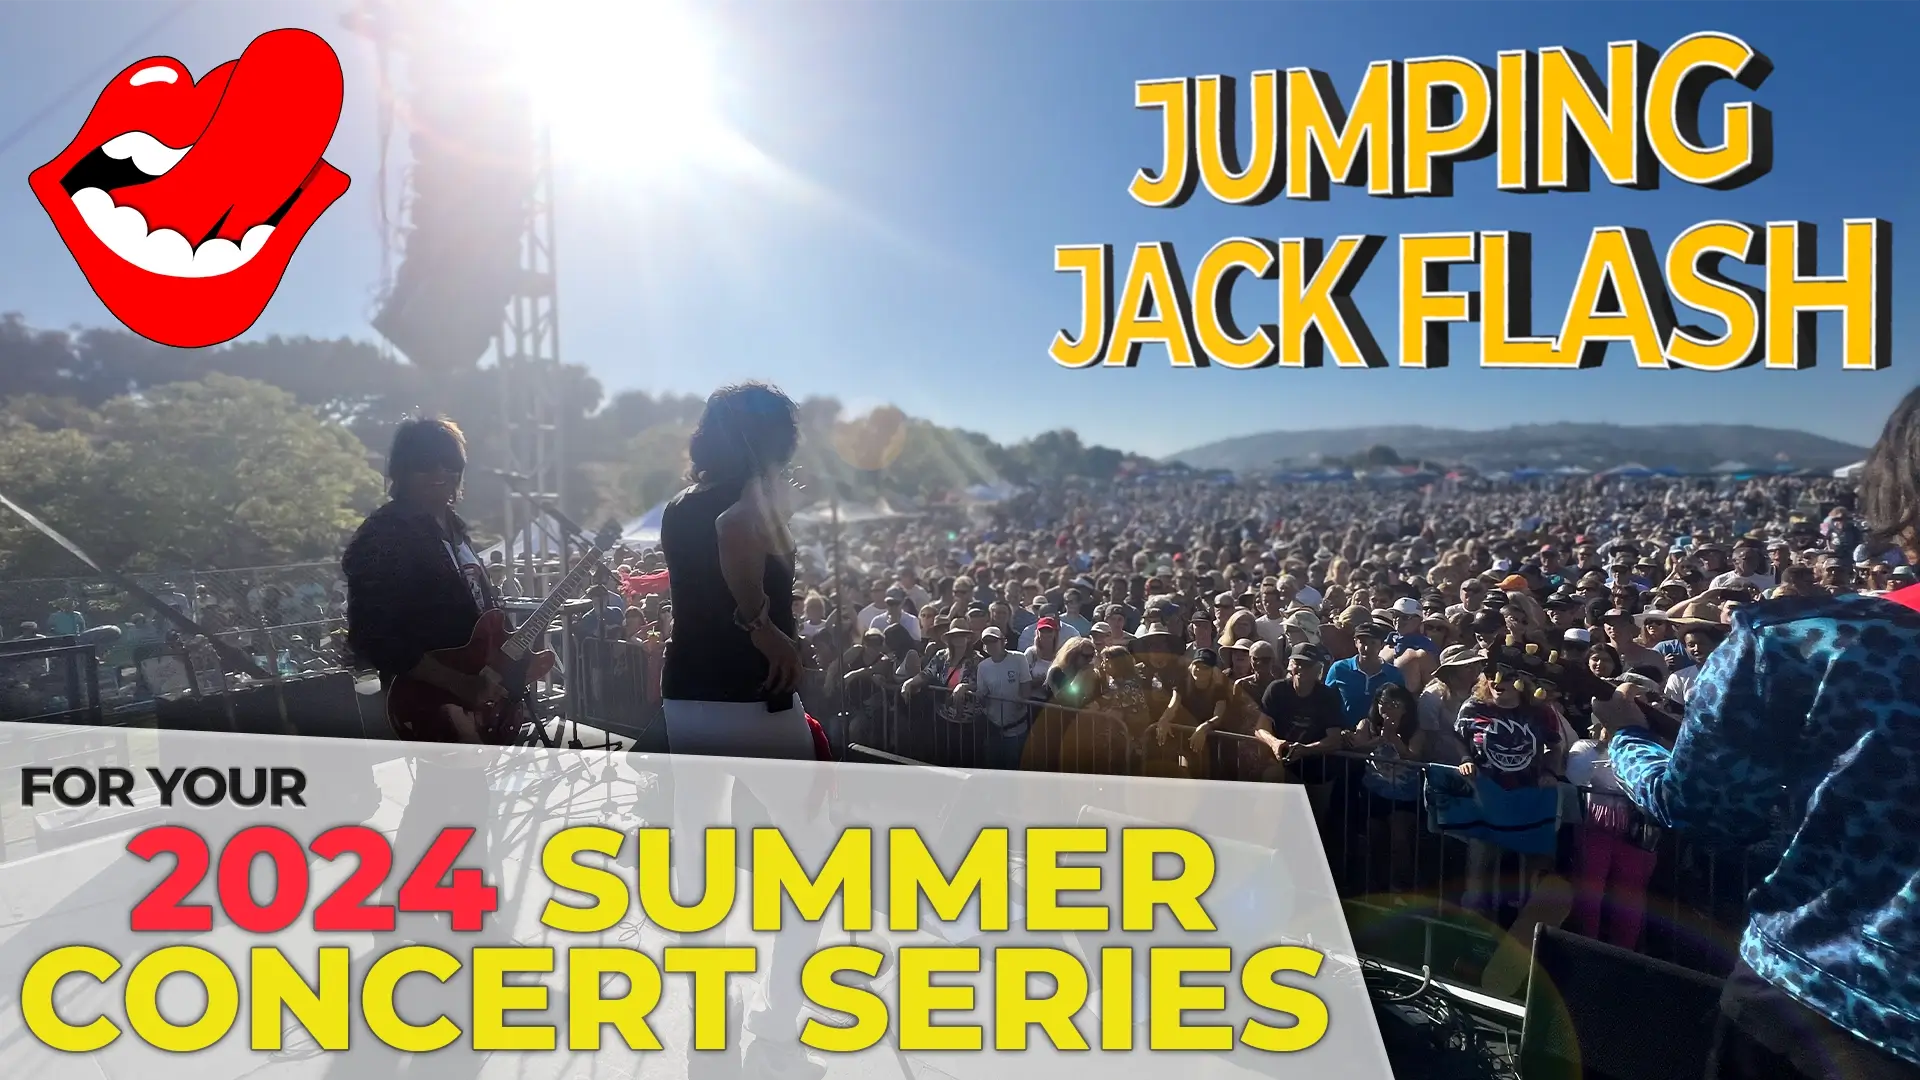 Hire Jumping Jack Flash for your city's Summer Concert Series for 2024!